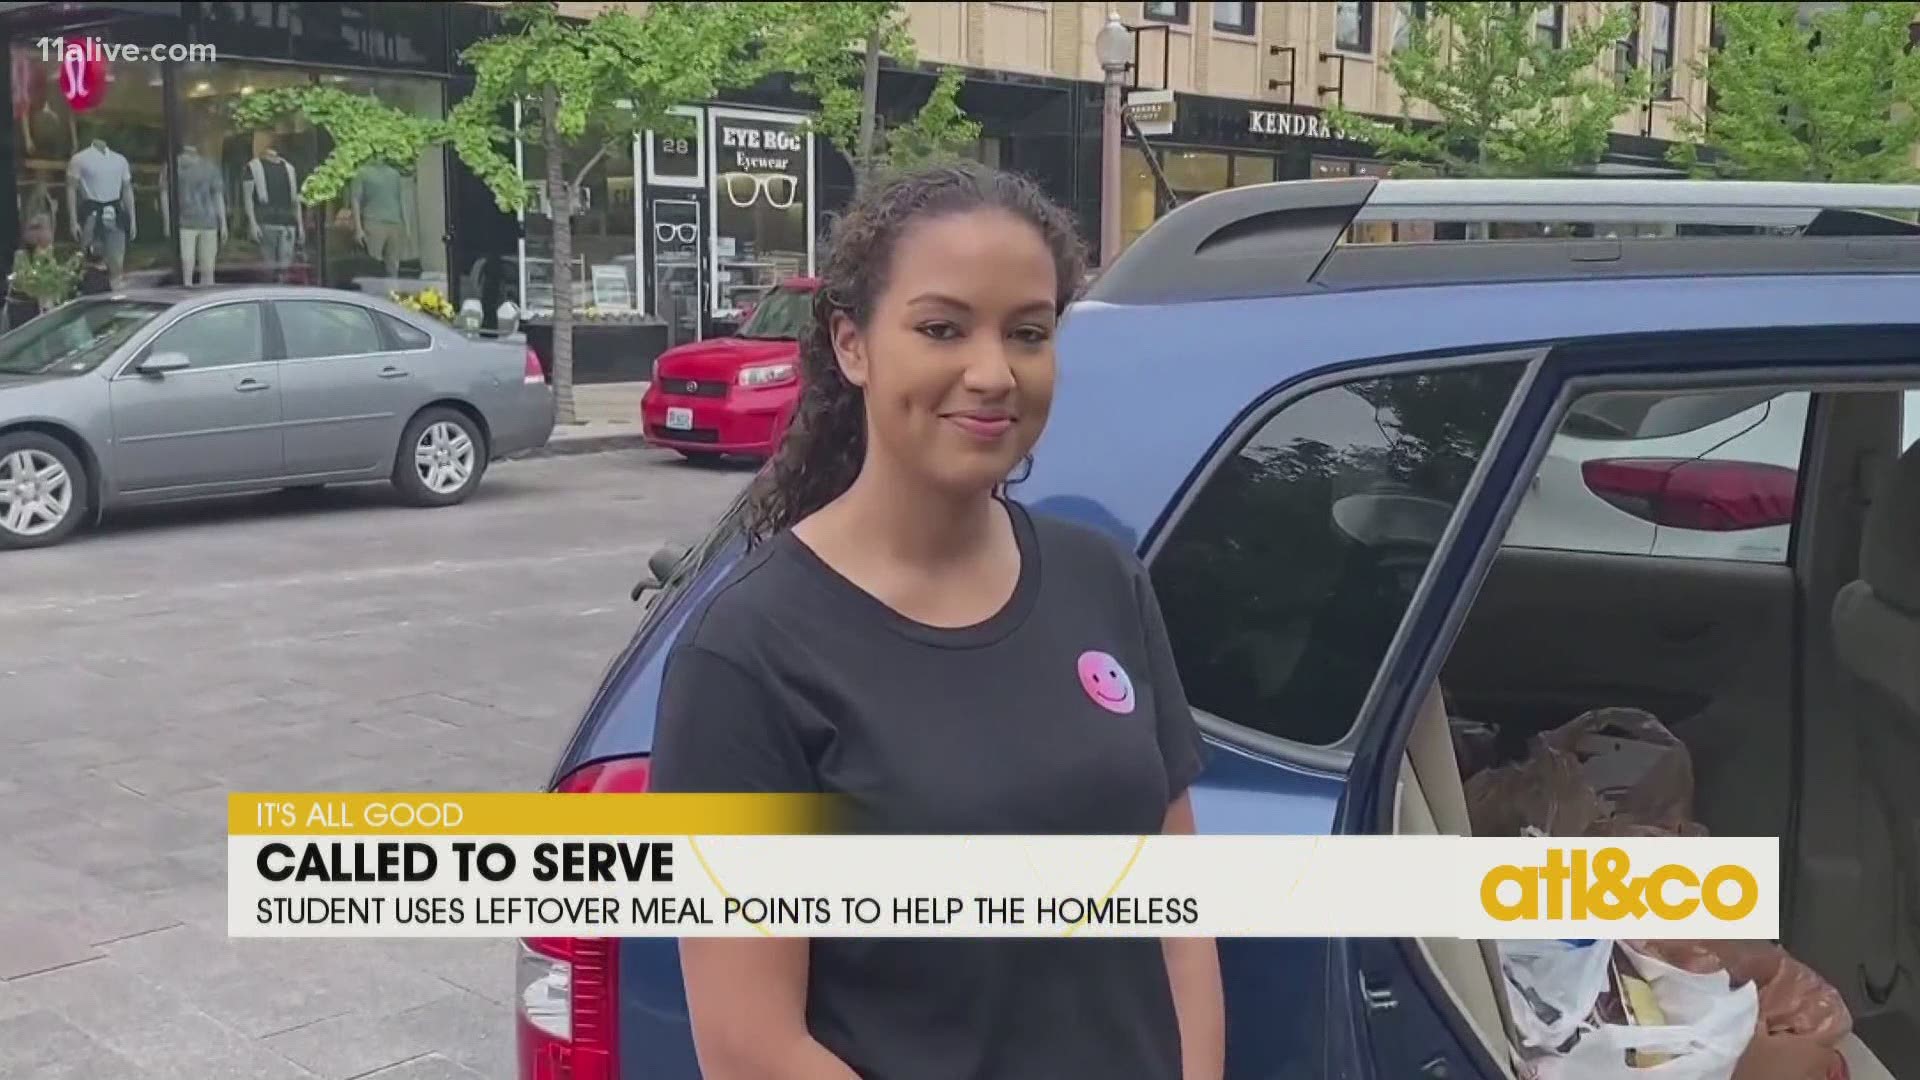 A Washington University senior is going viral on TikTok after spending her leftover meal points on care packages for those in need.